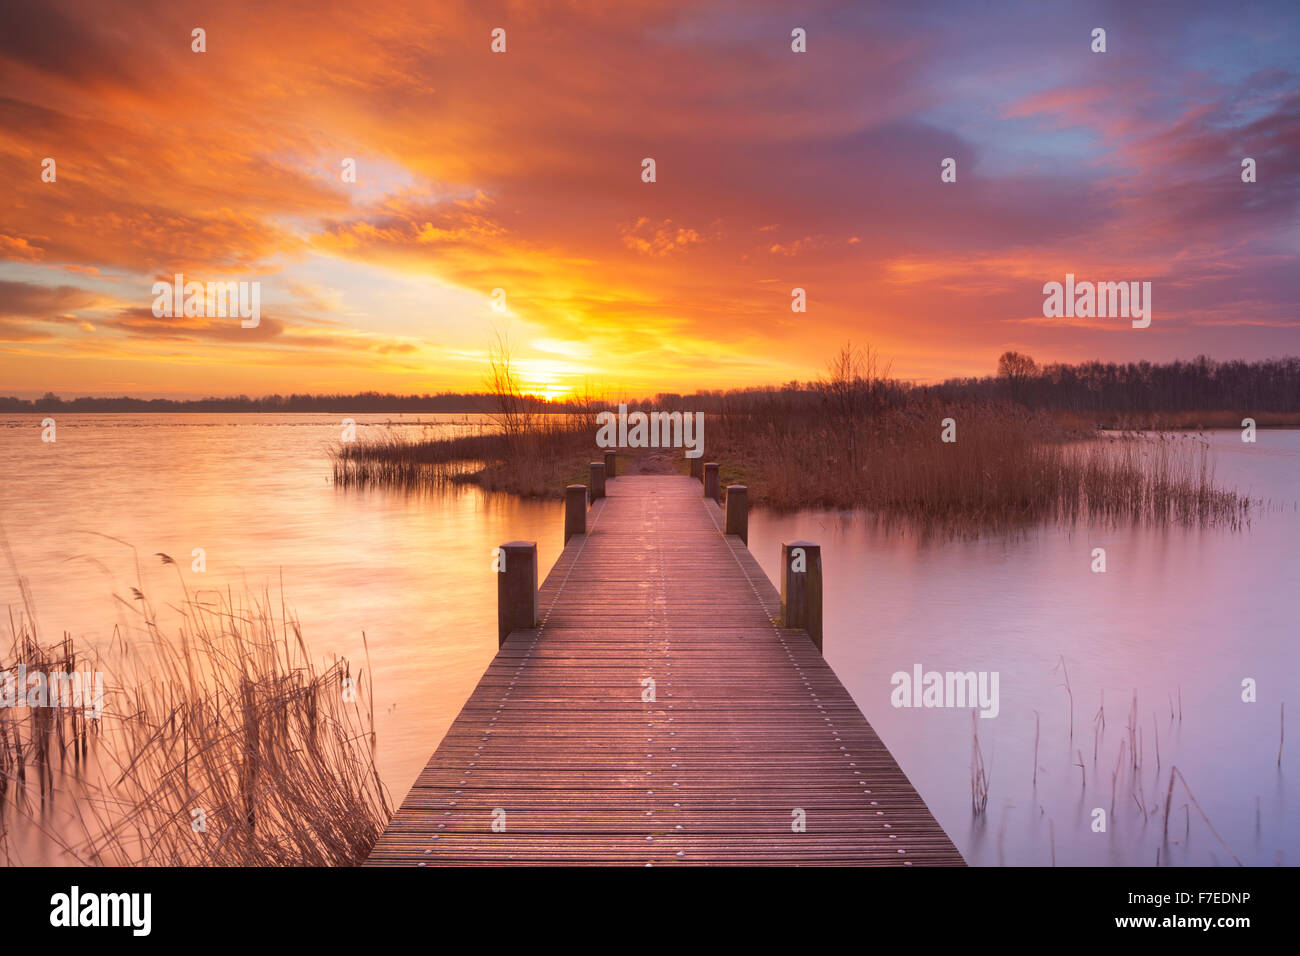 Spectacular sunrise over a lake near Amsterdam in The Netherlands. Stock Photo